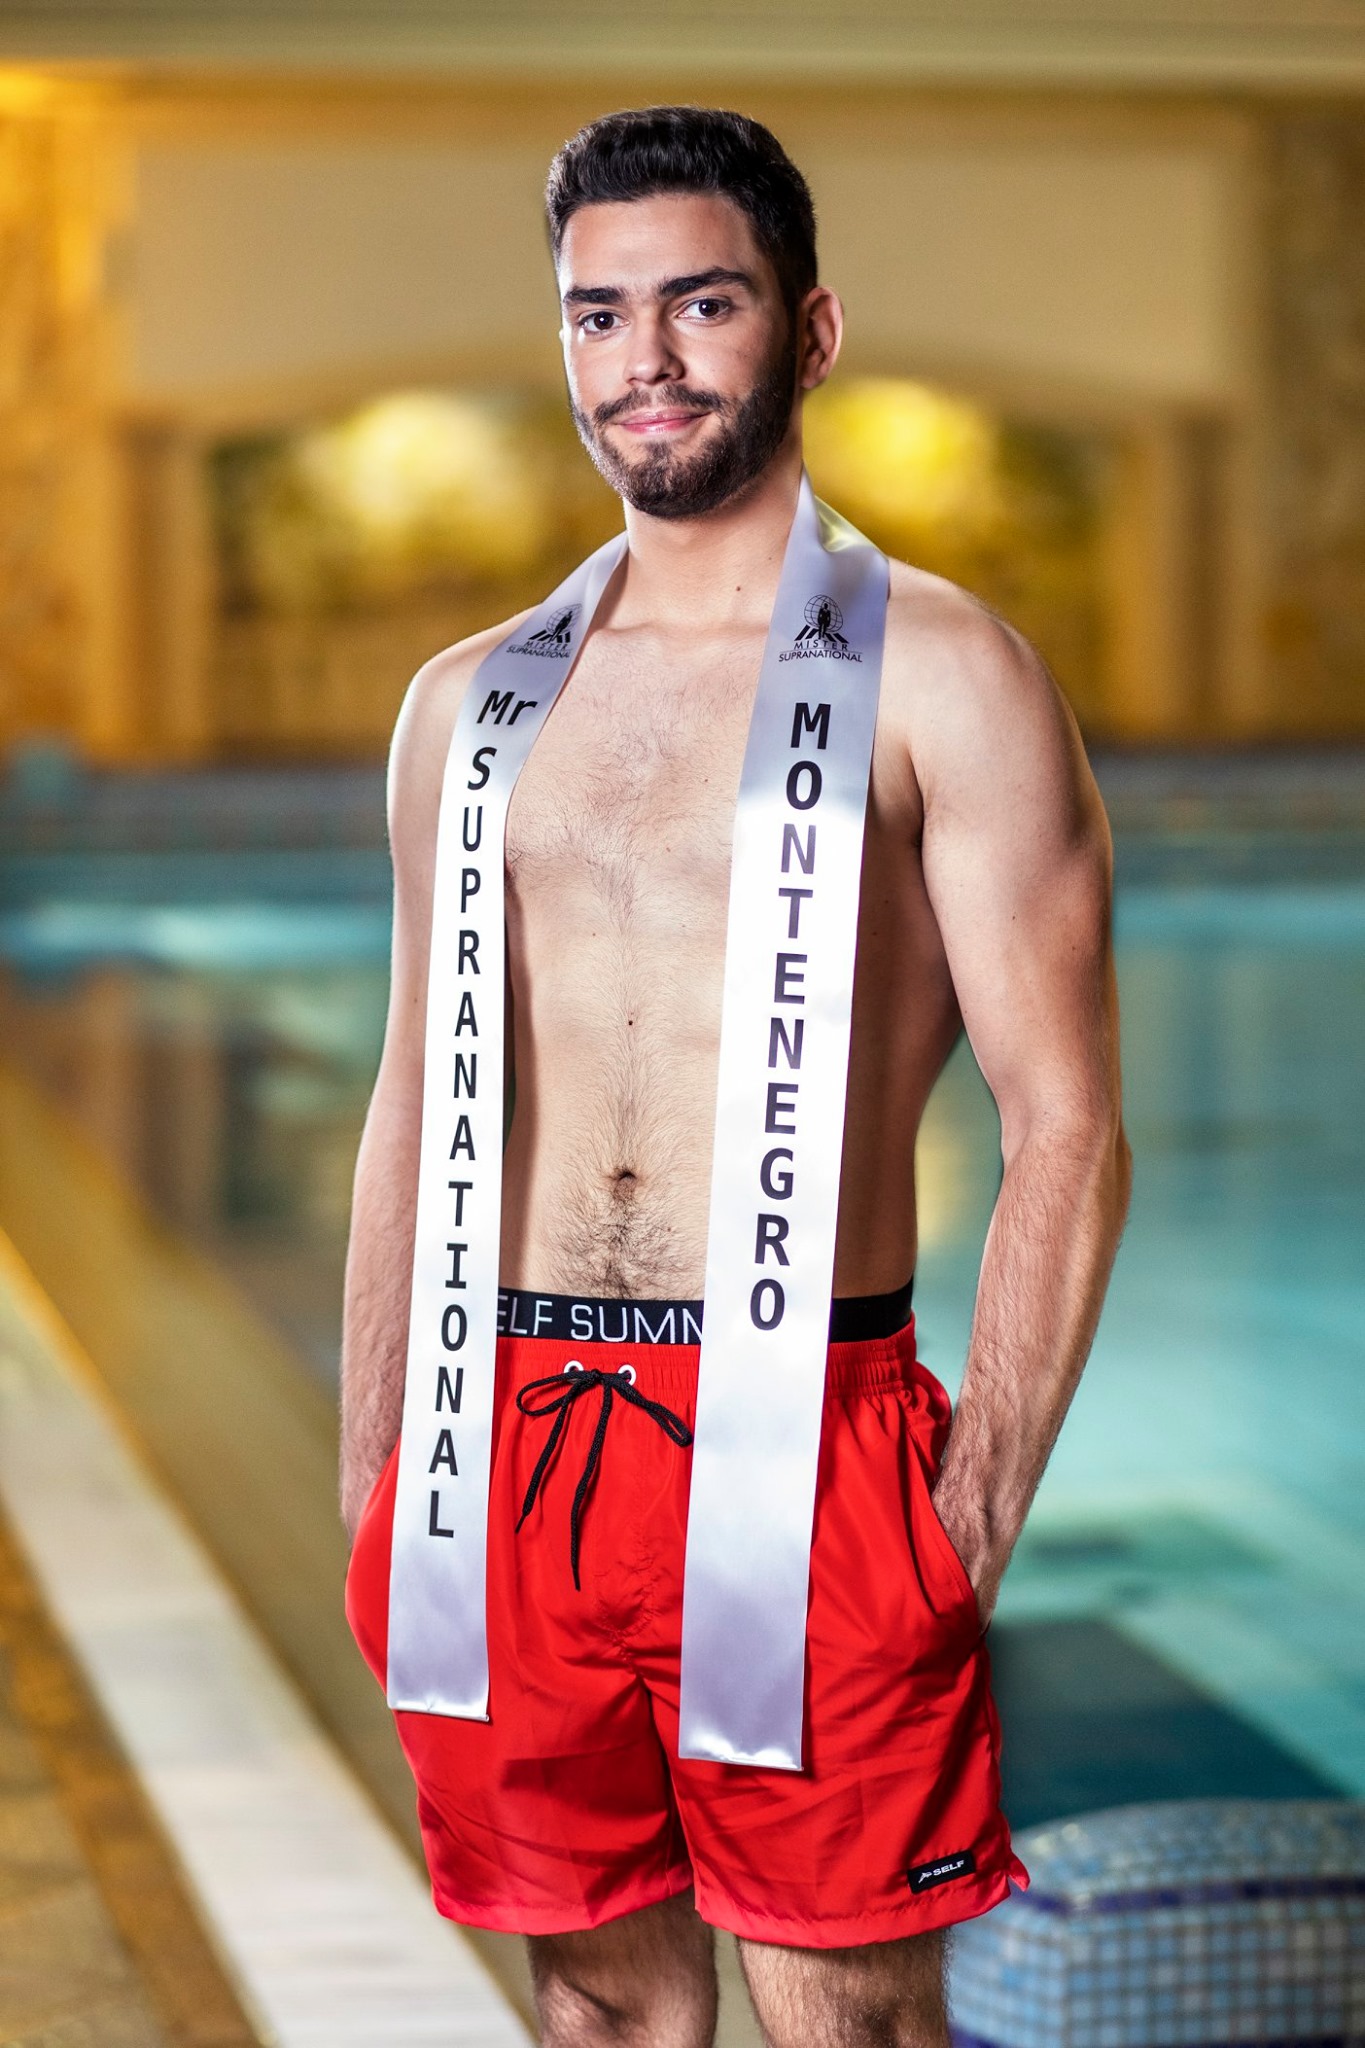 Mister Supranational 2019 Official Swimwear 0013